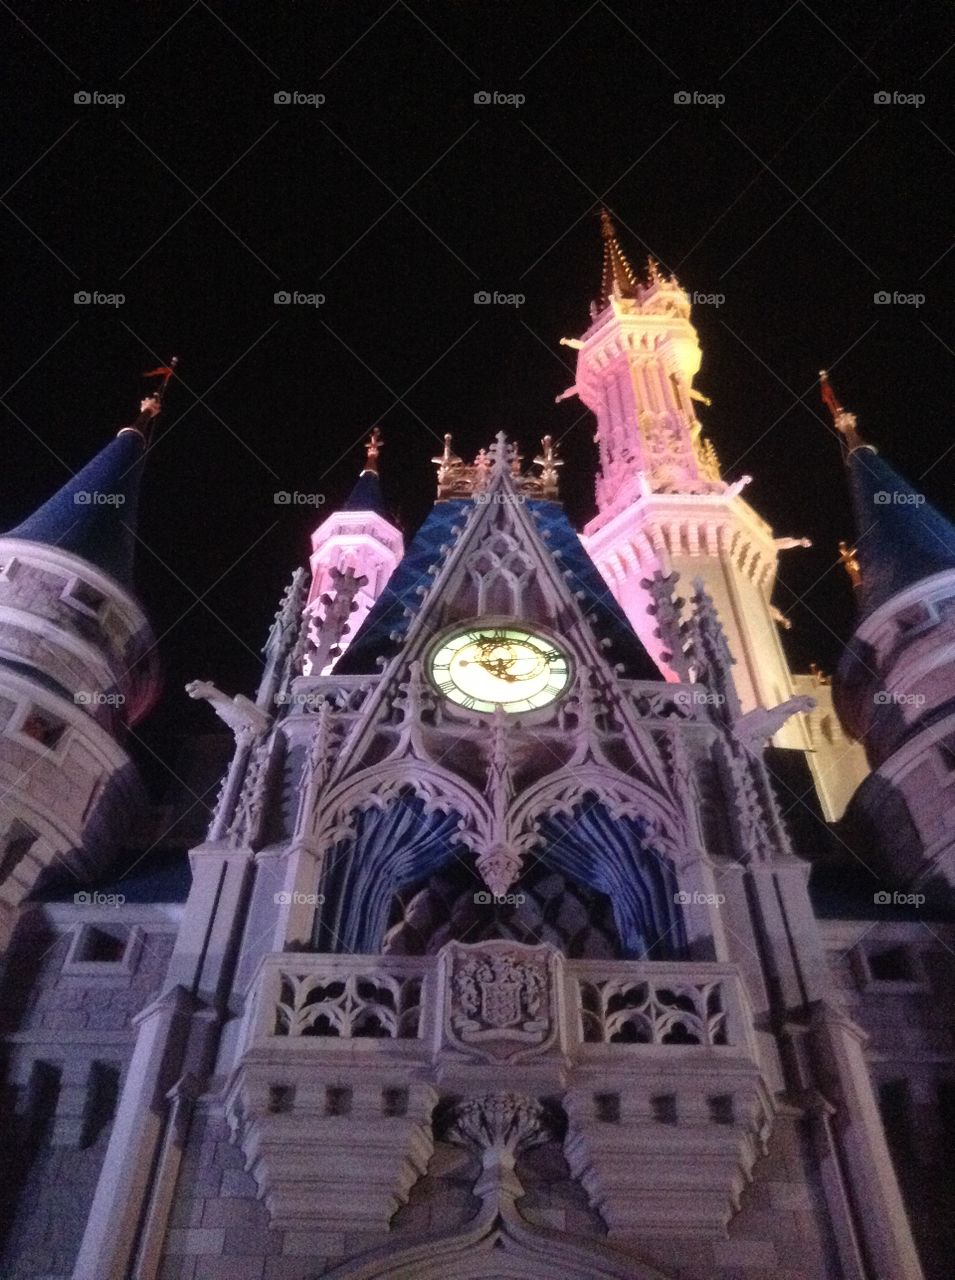 The prince's castle. This is a pic of Cinderella's castle in Disney in Orlando FL